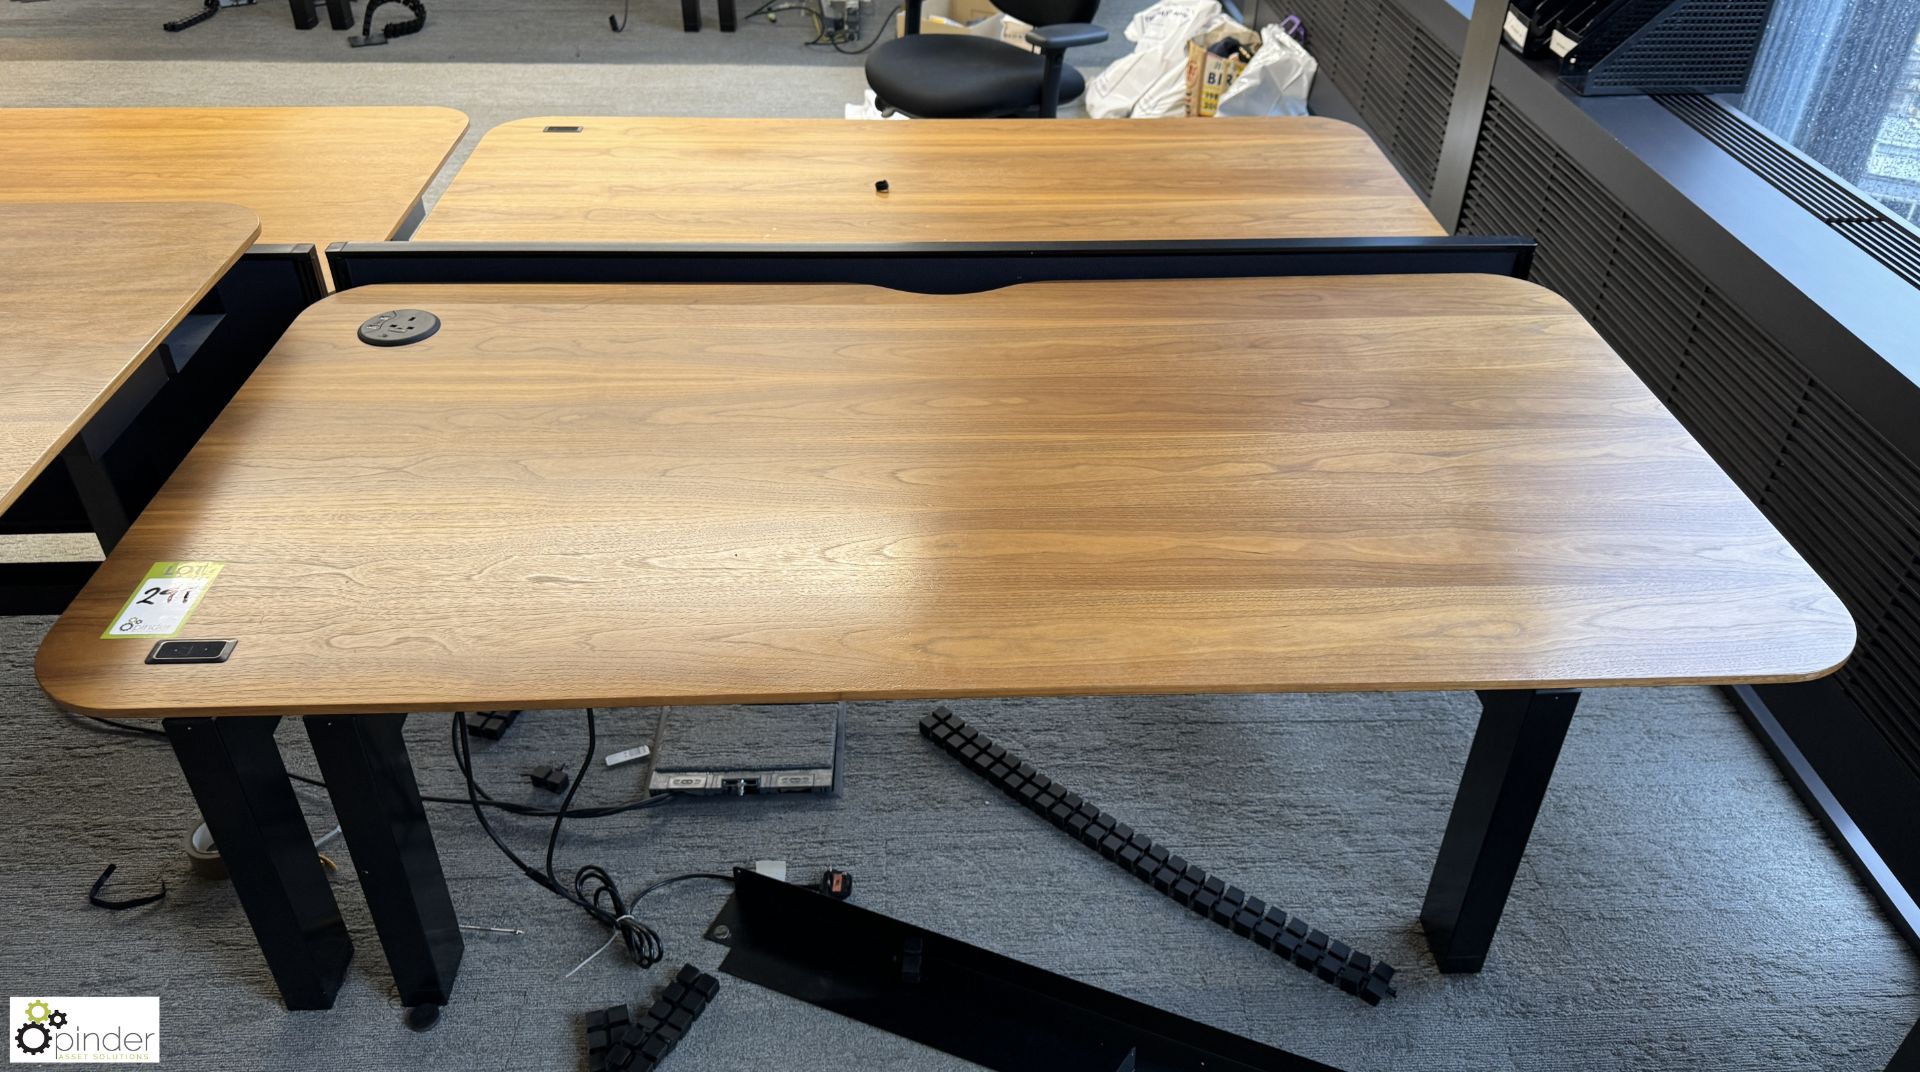 OMT back to back powered rise and fall Desks, 1600mm x 800mm per desk leaf, cherry veneer,with - Image 2 of 5